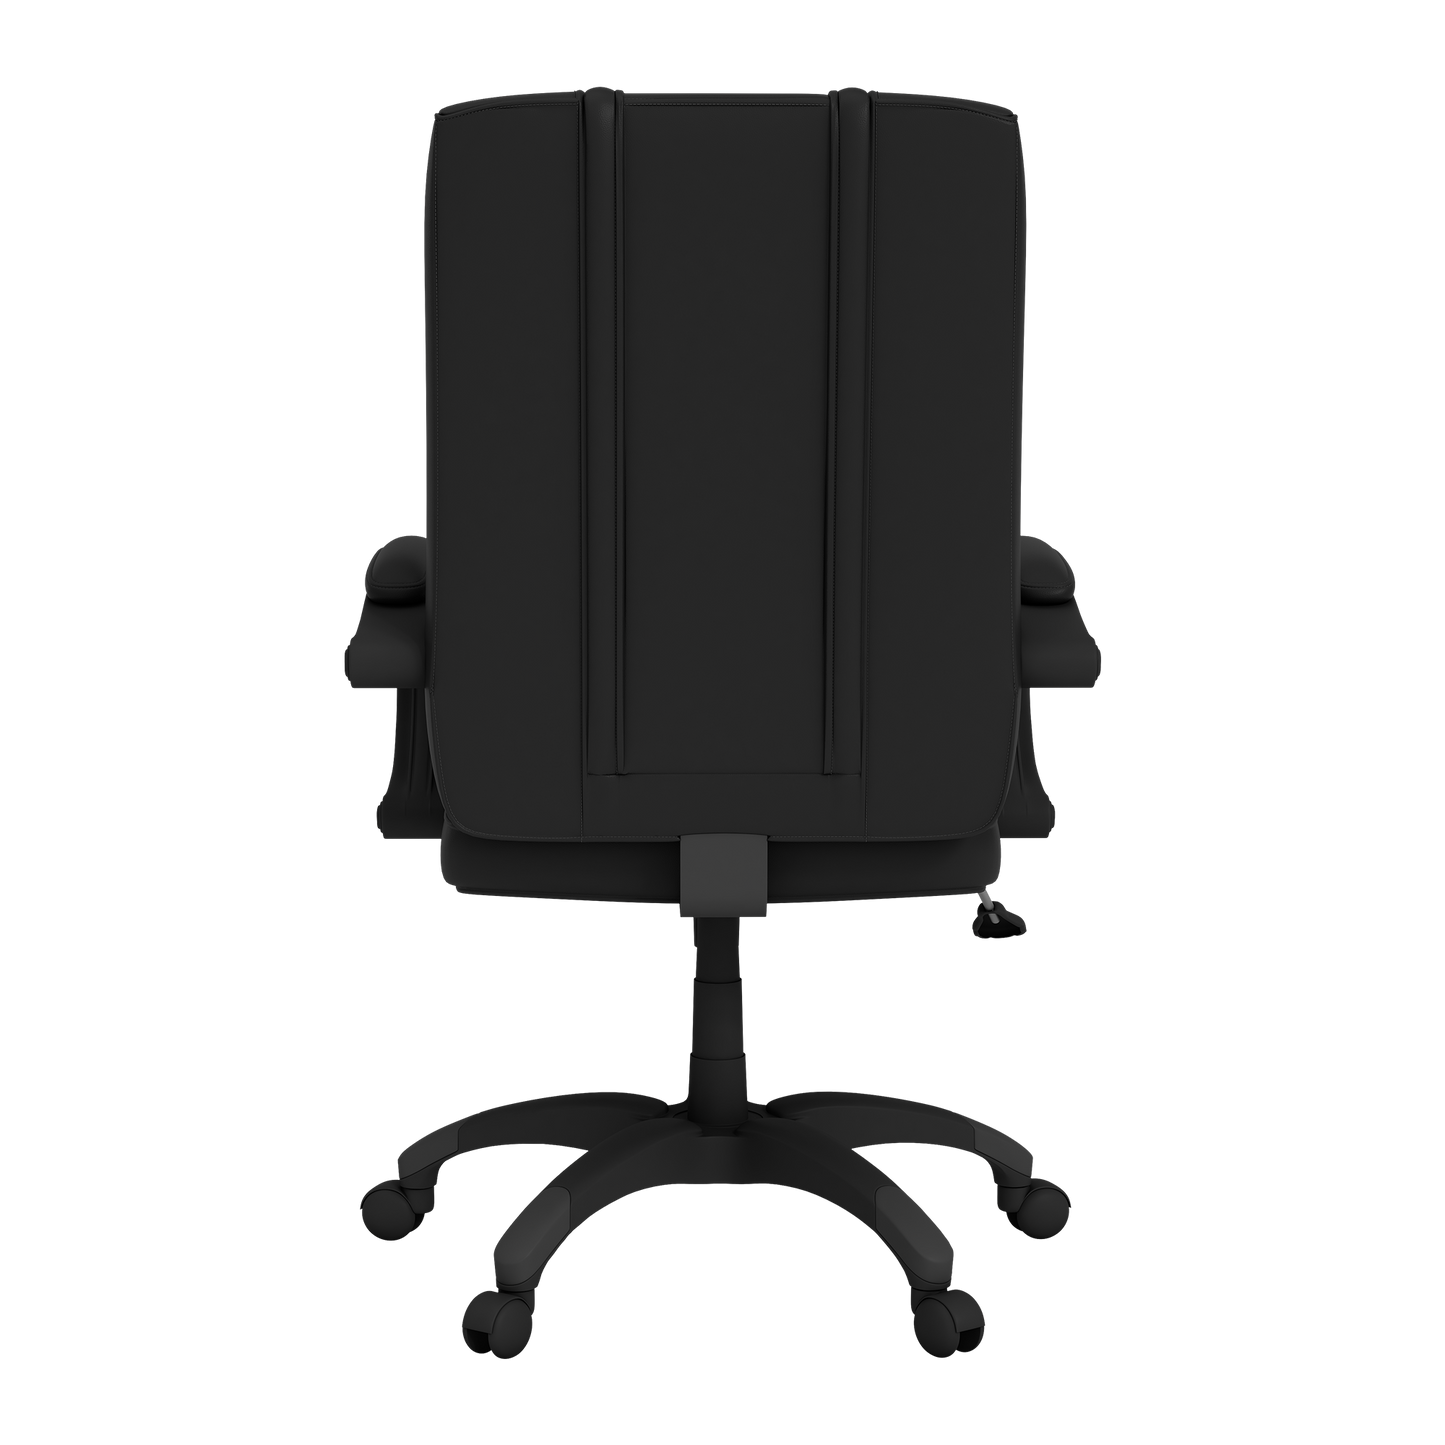 Office Chair 1000 with New York City FC Logo